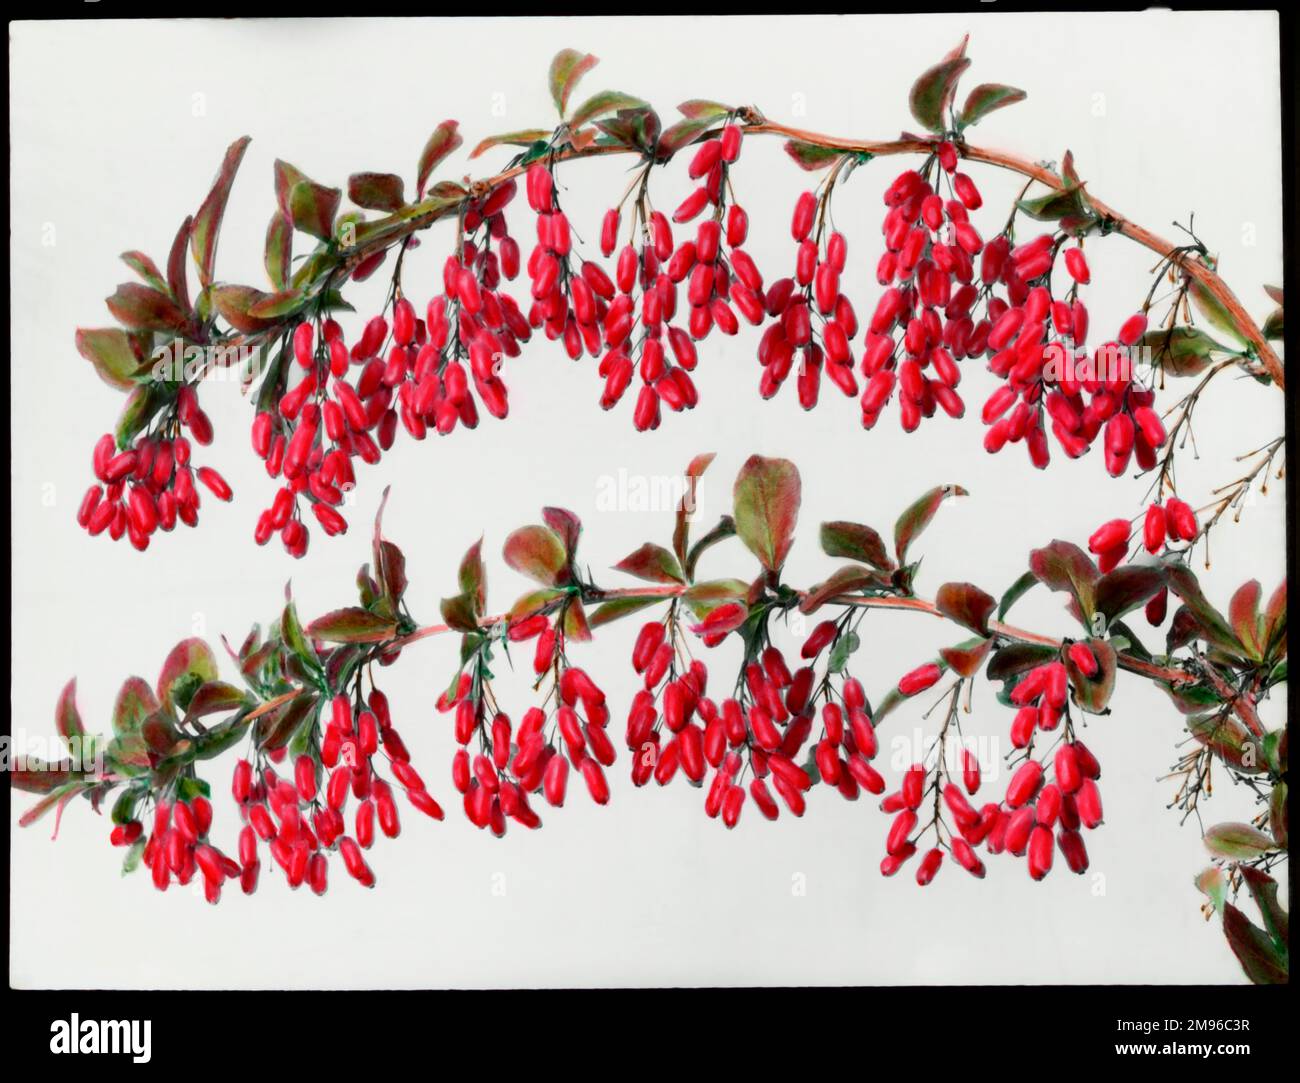 Two branches of Berberis Carvellii (barberry or pepperidge bush) of the Berberidaceae family, full of bright red berries, which provide food for small birds. Stock Photo